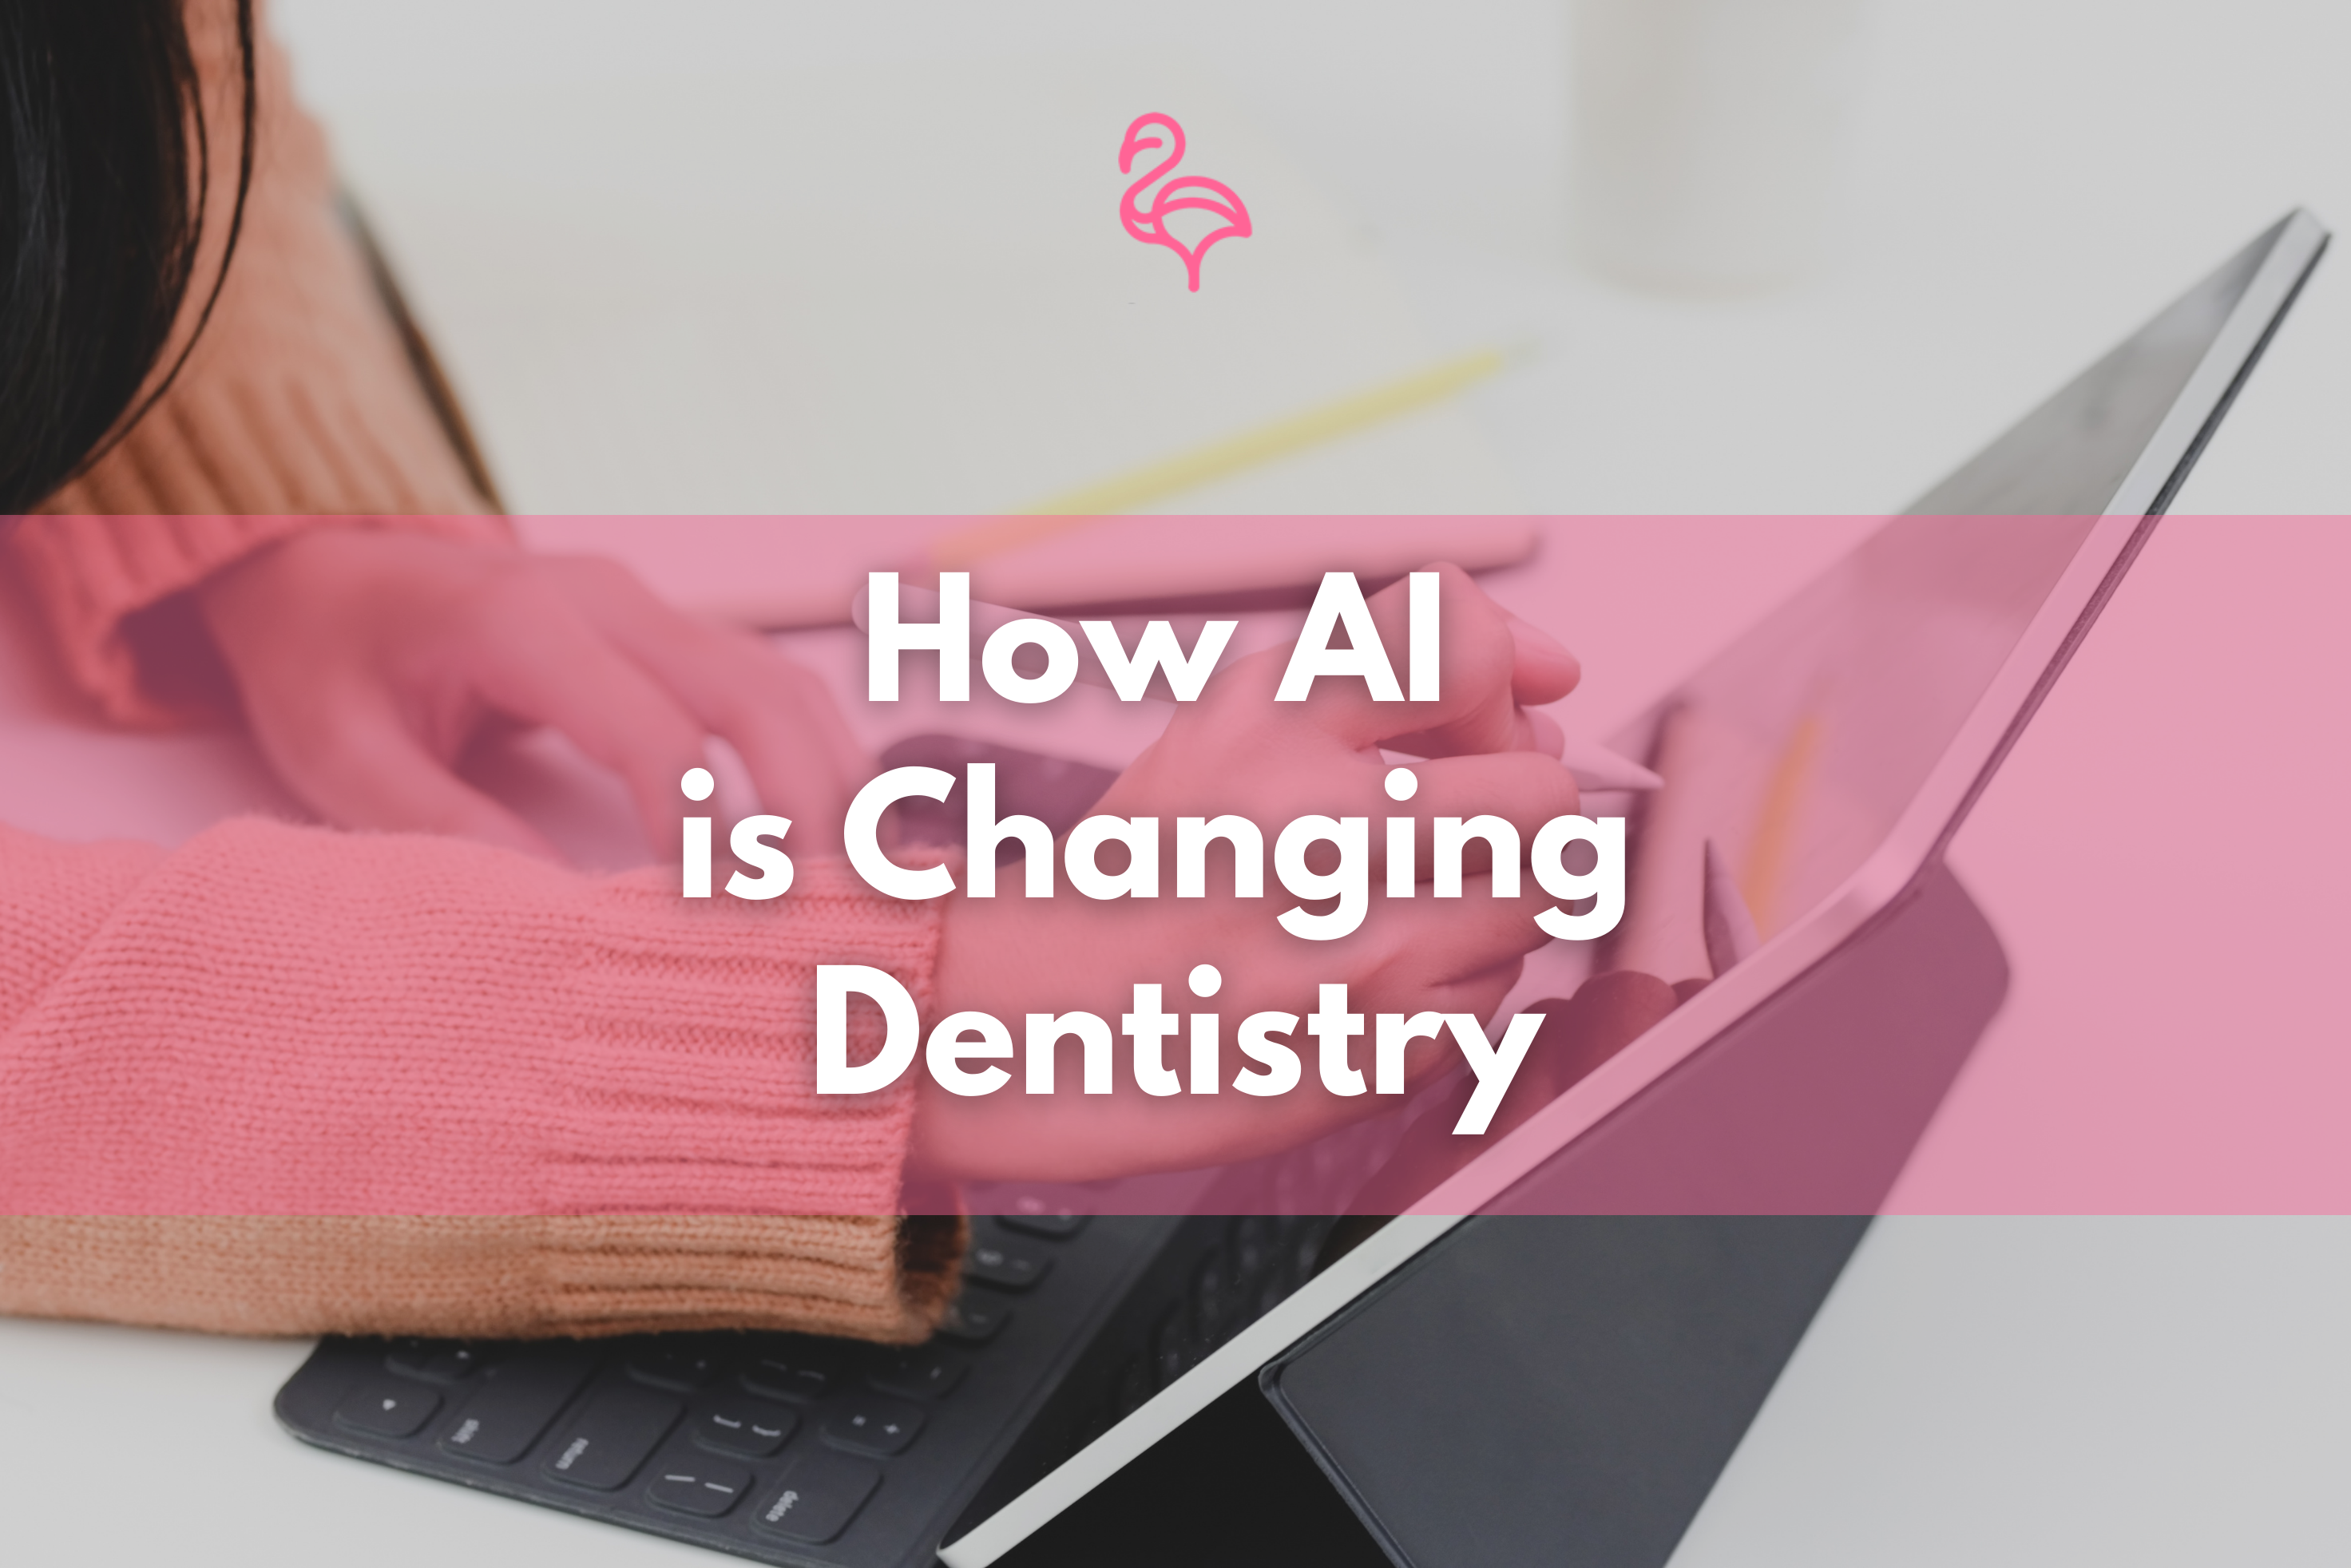 How AI is Changing Dentistry